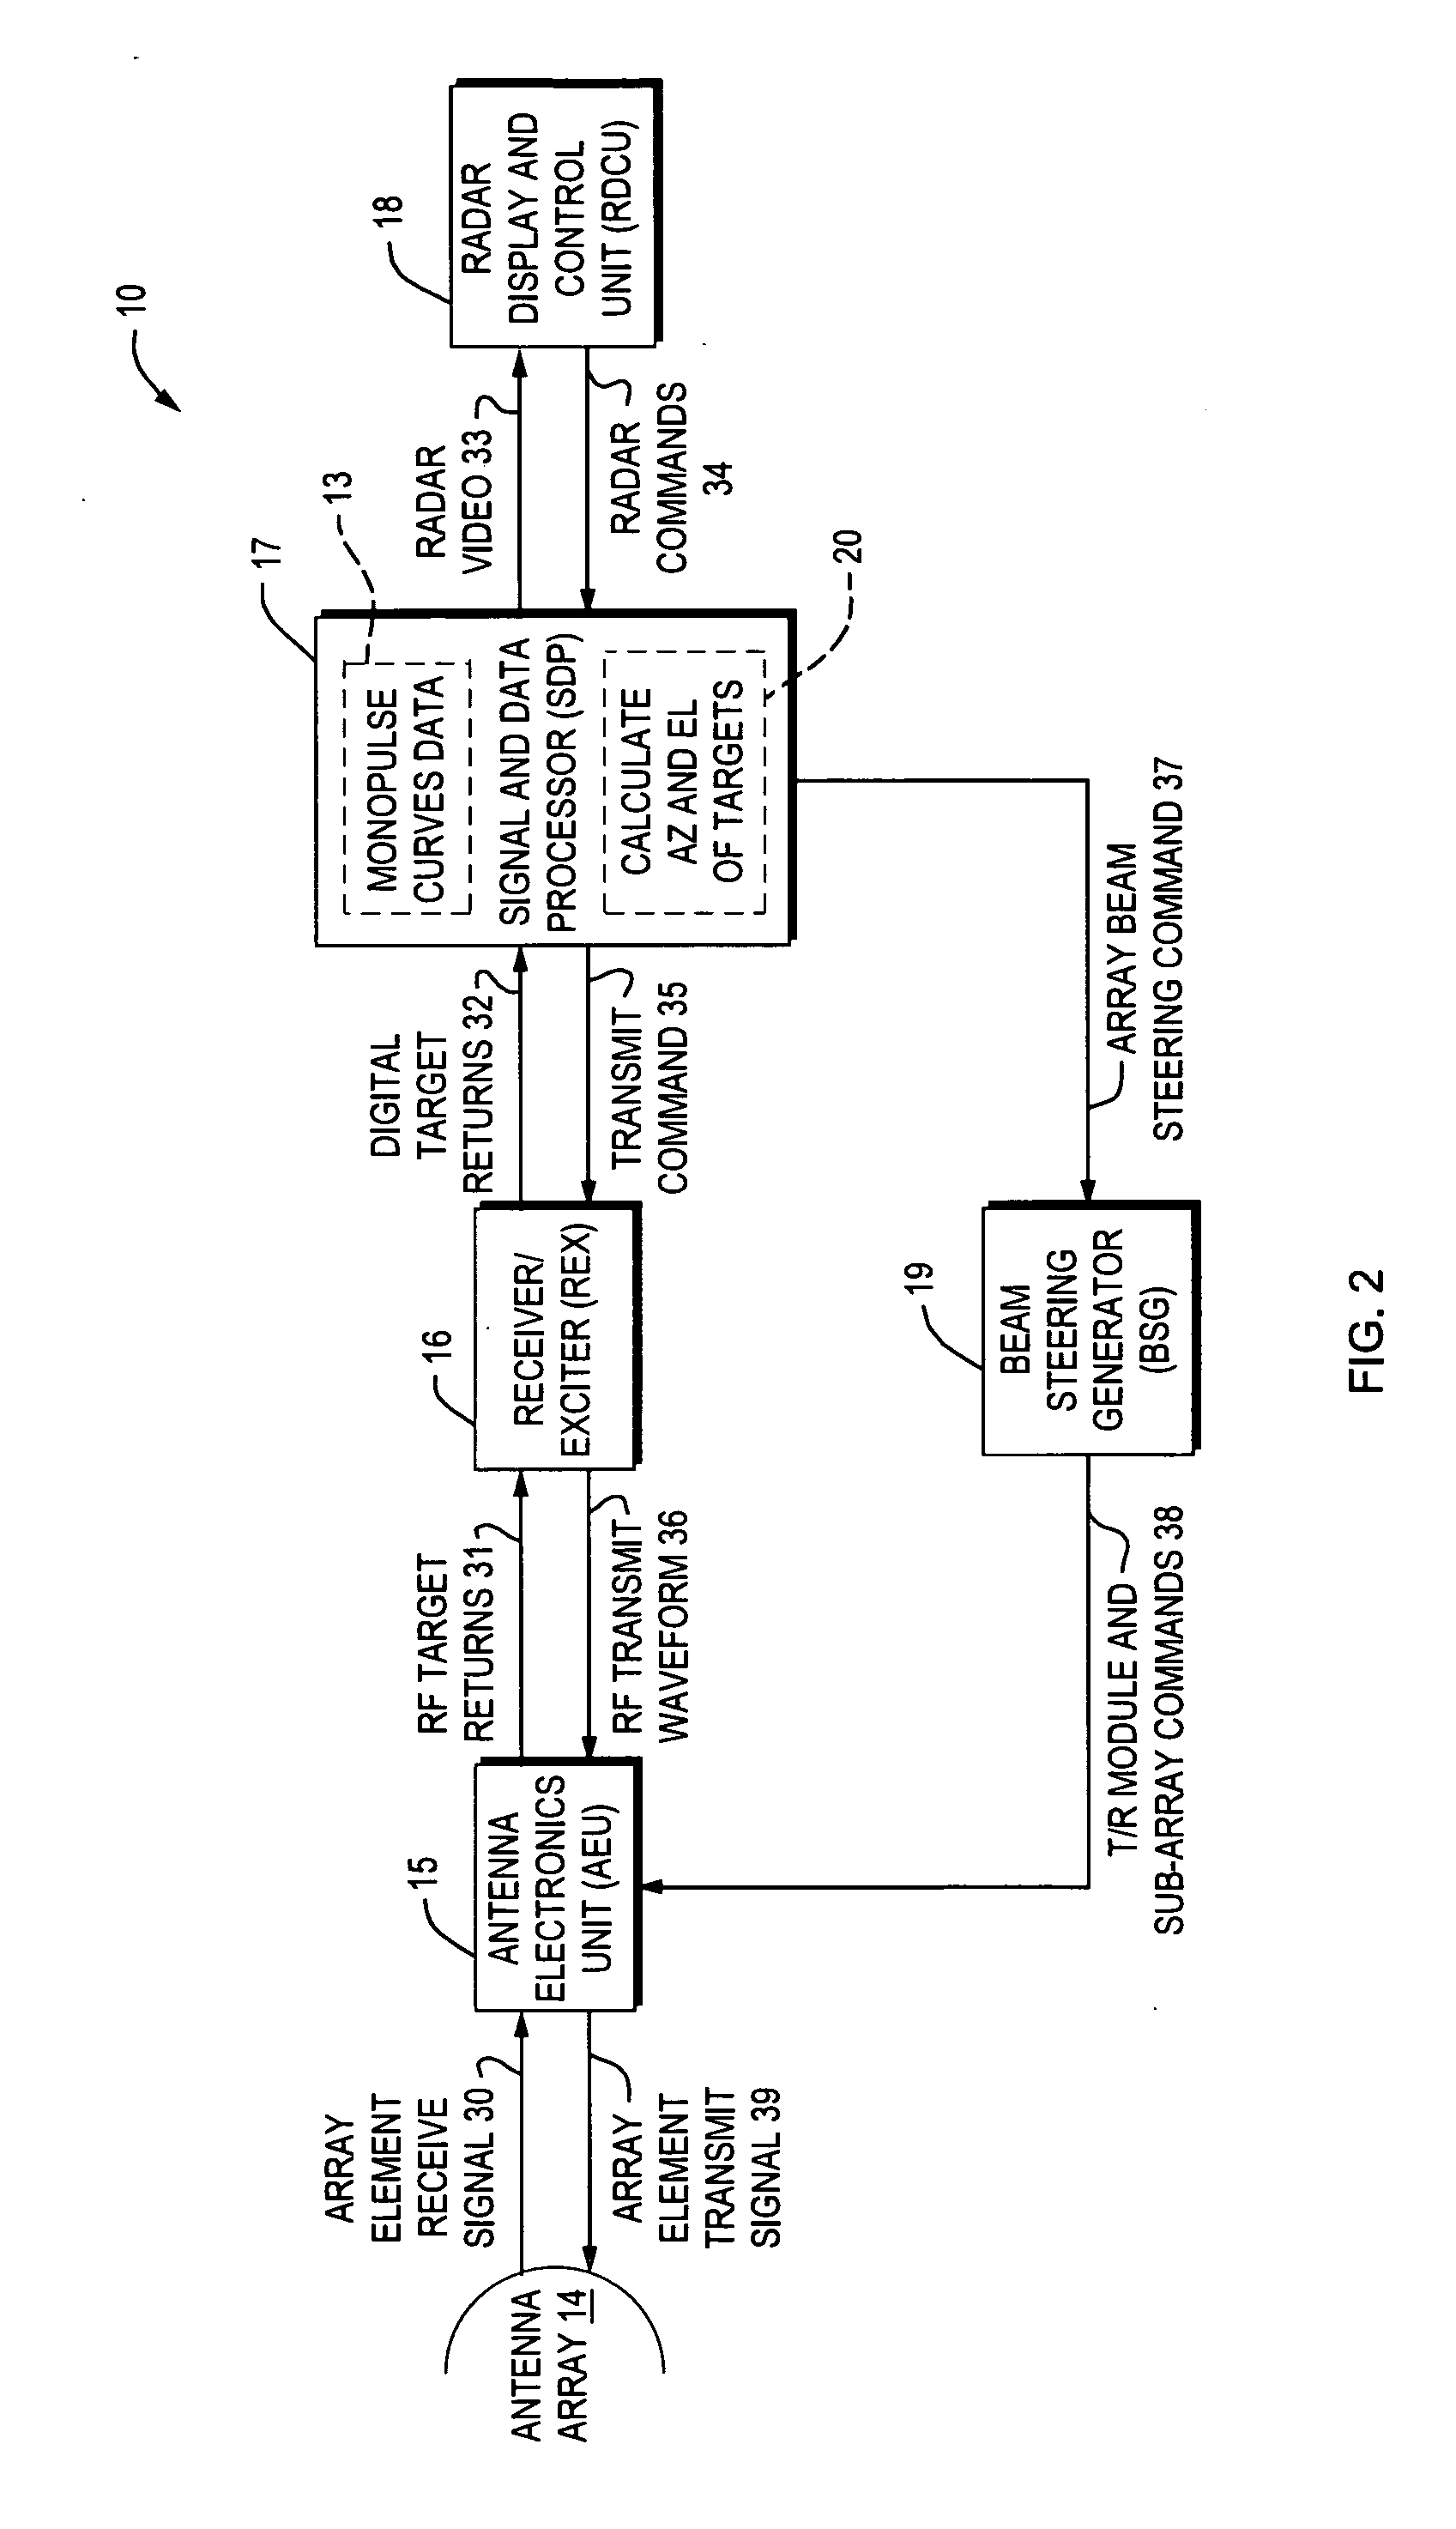 Method of generating accurate estimates of azimuth and elevation angles of a target for a phased-phased array rotating radar